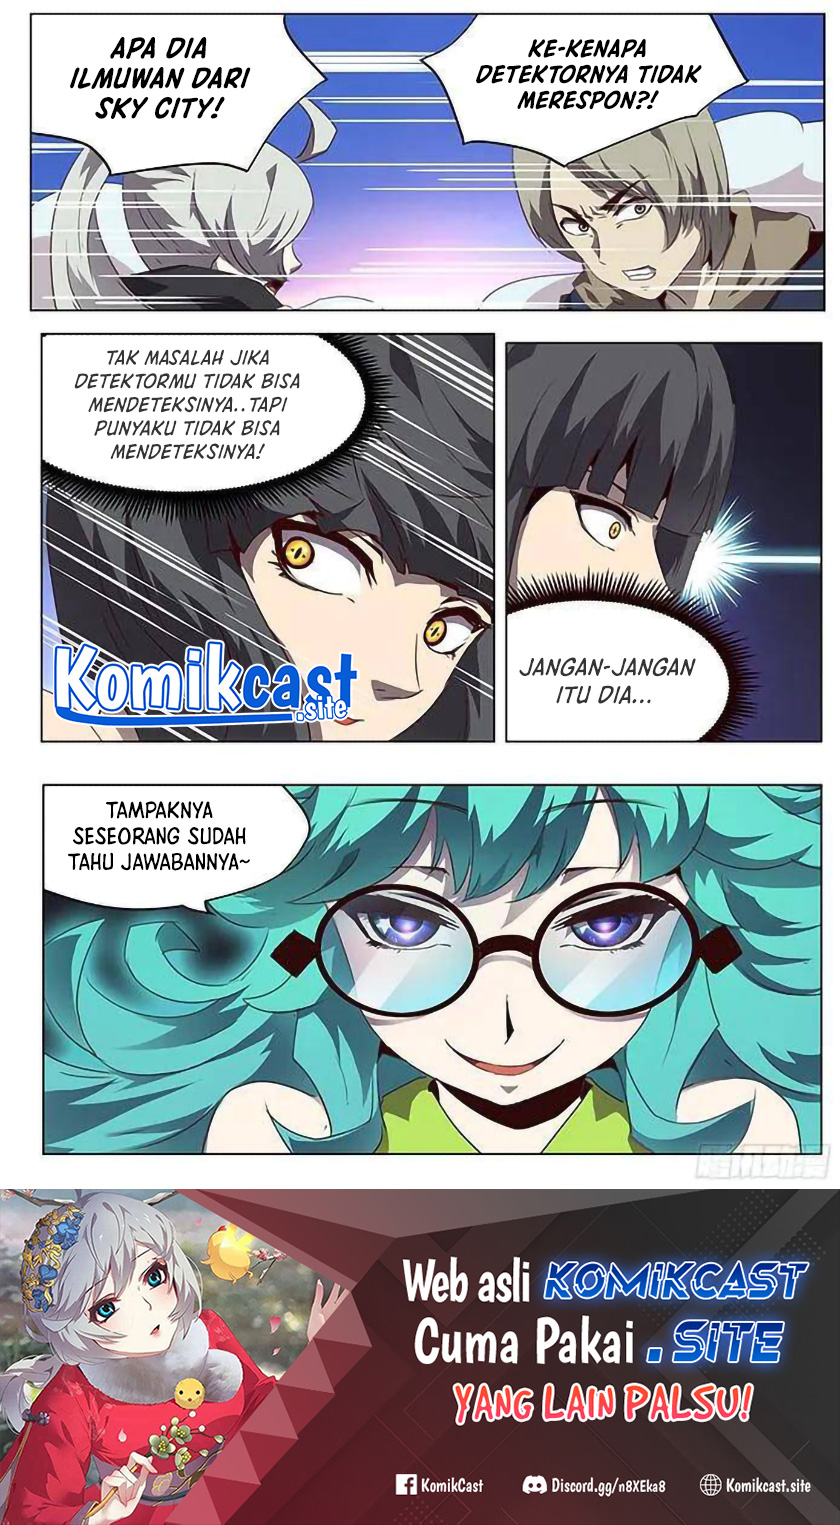 Girl And Science Chapter 86